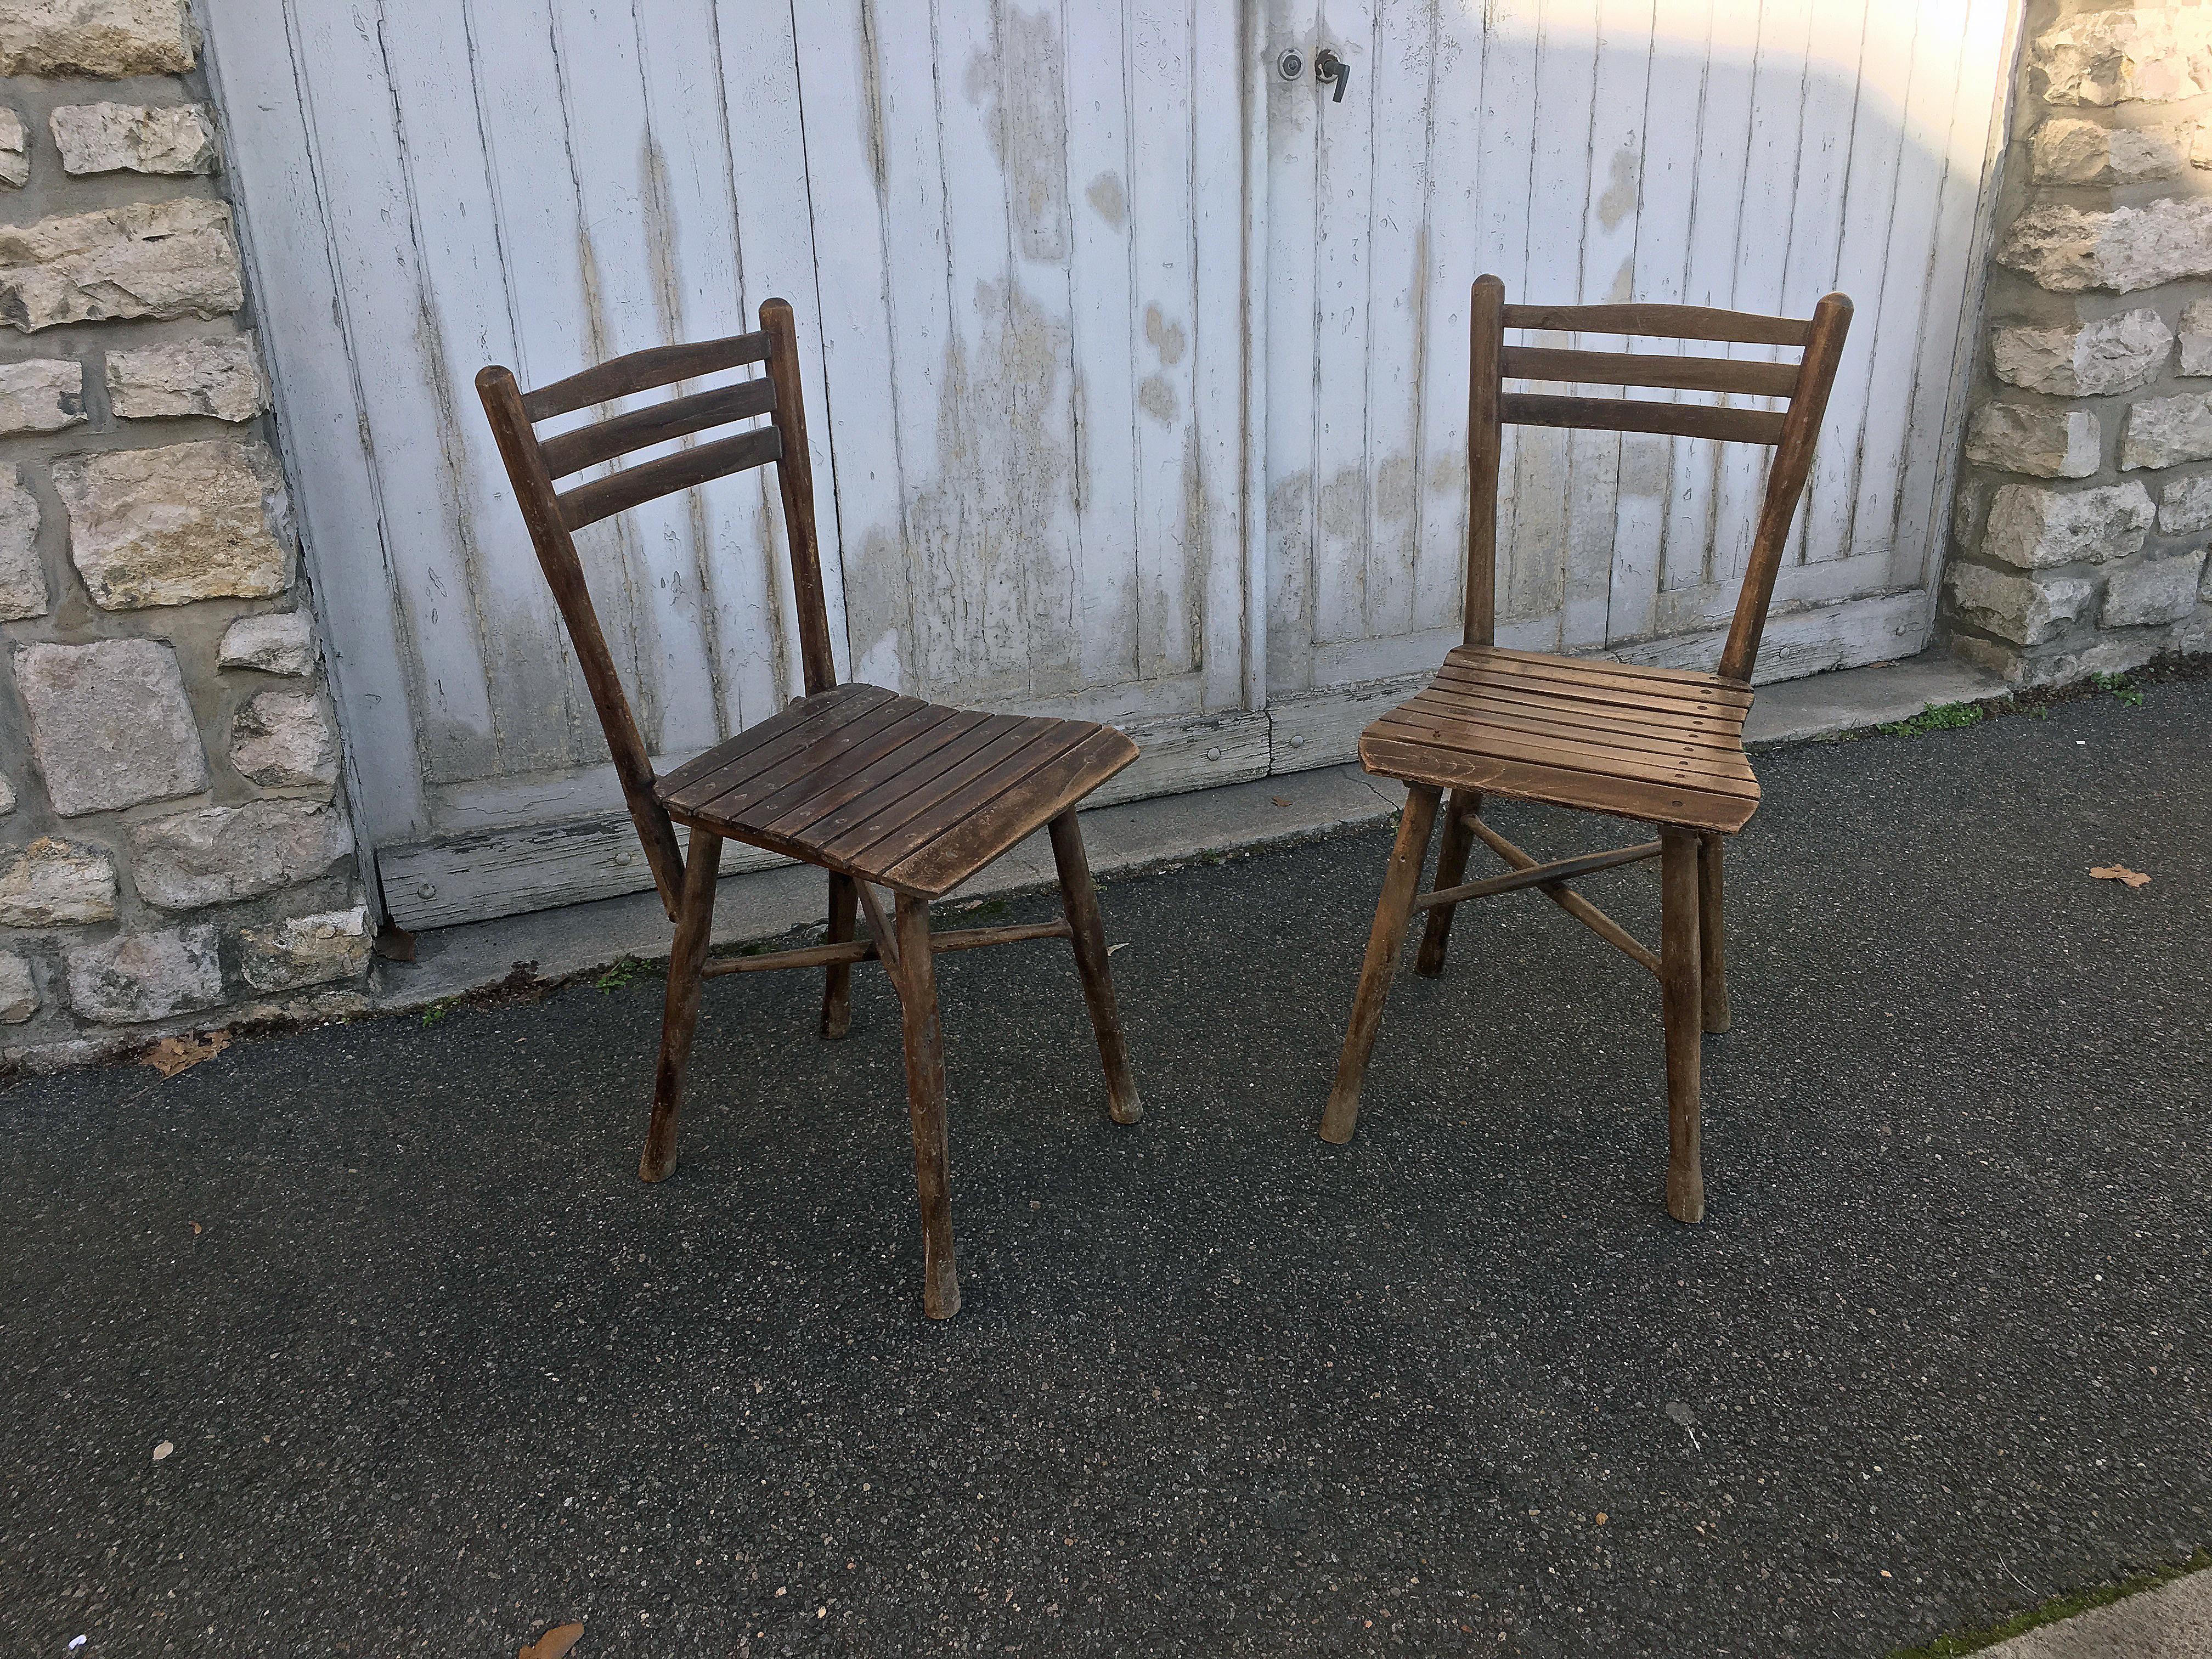 Pair of chairs in the Thonet style, circa 1900
to be restored.